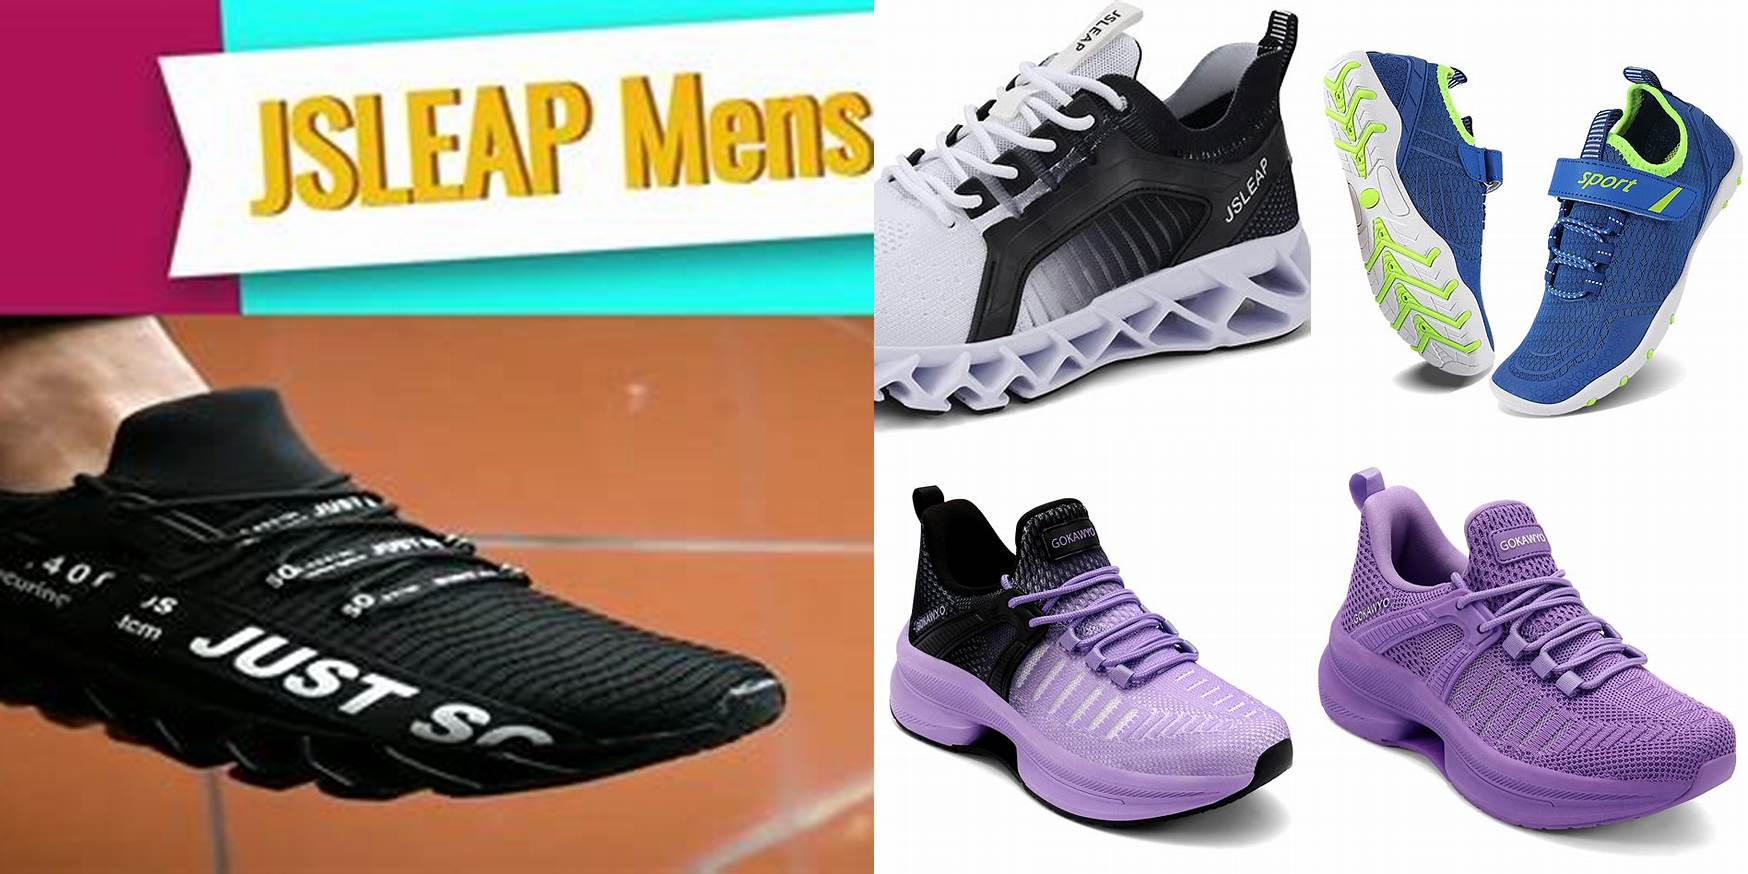 Who Makes Jsleap Shoes